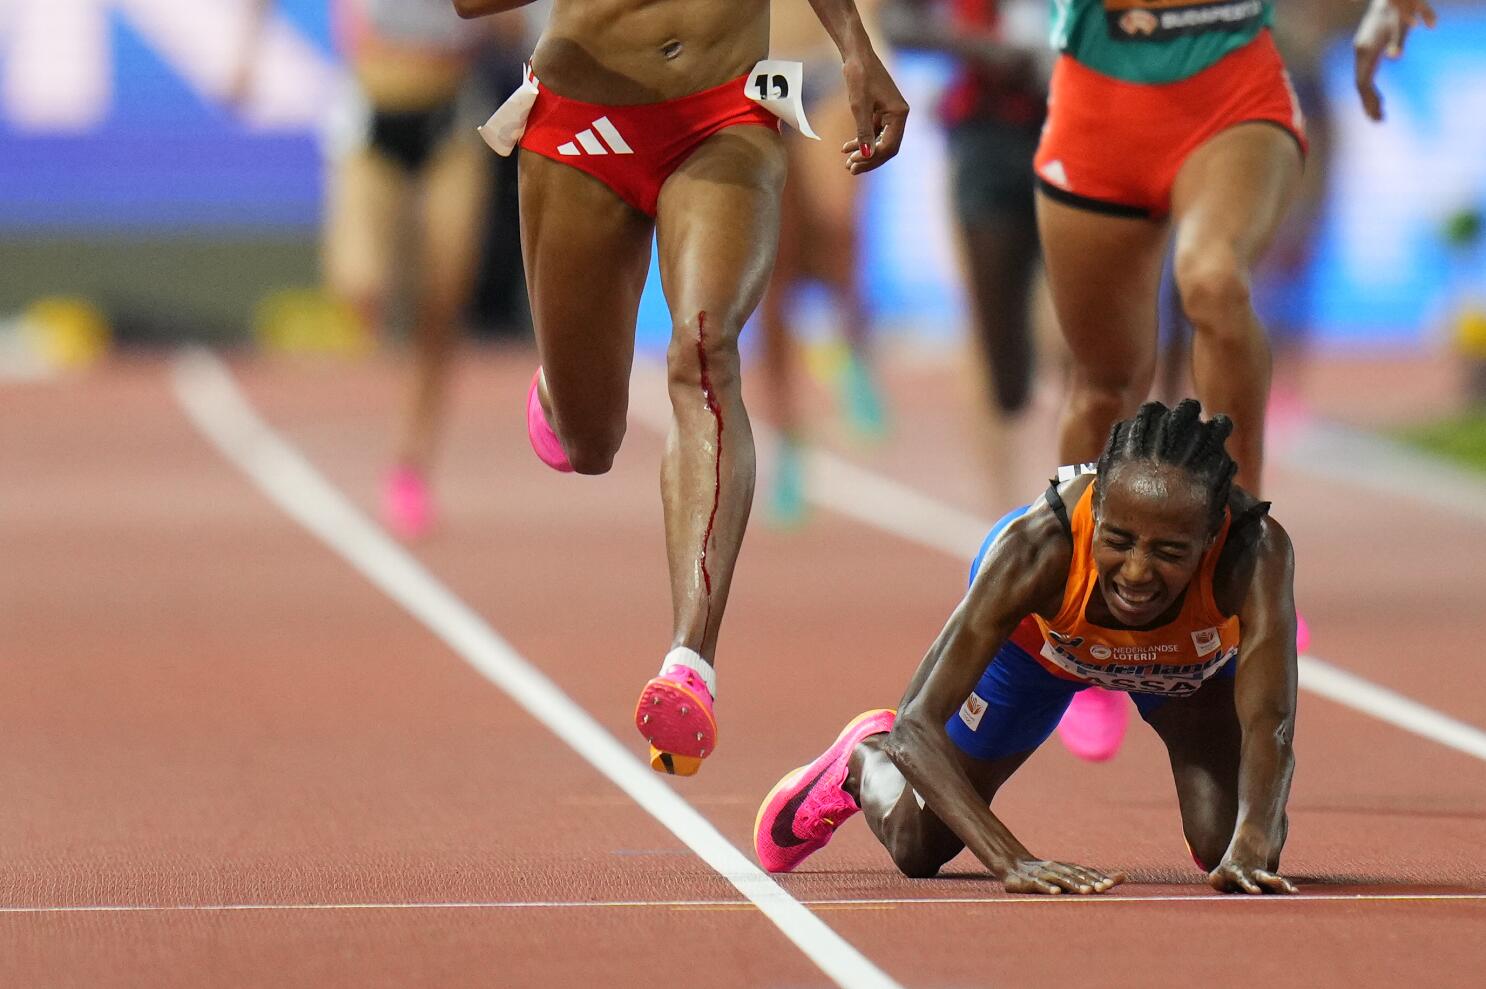 Netherlands' Sifan Hassan falls, gets up and wins 1,500 heat at